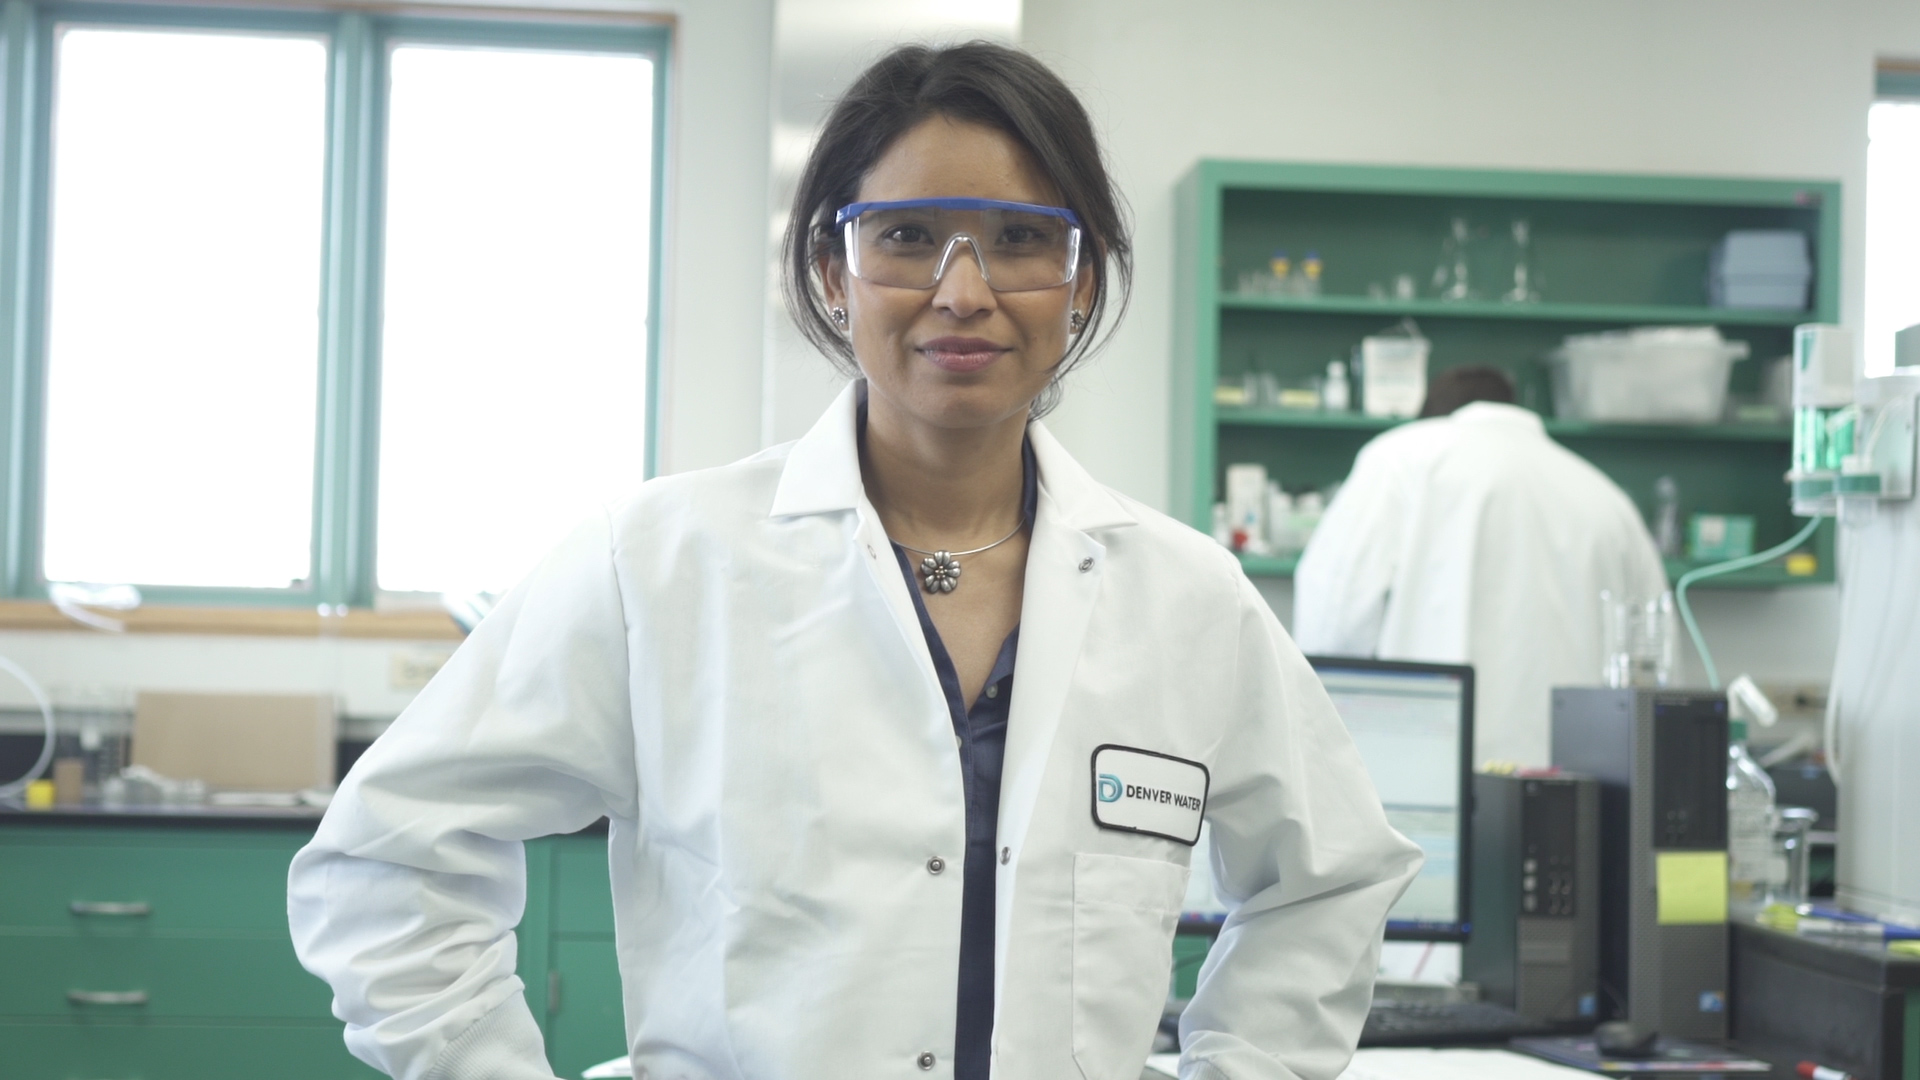 Selene Hernandez-Ruiz, who has a doctorate in science and wrote her dissertation on endocrine disruptor compounds in water, manages Denver Water’s water quality lab, overseeing the safety and purity of Denver’s drinking water. Photo credit: Denver Water